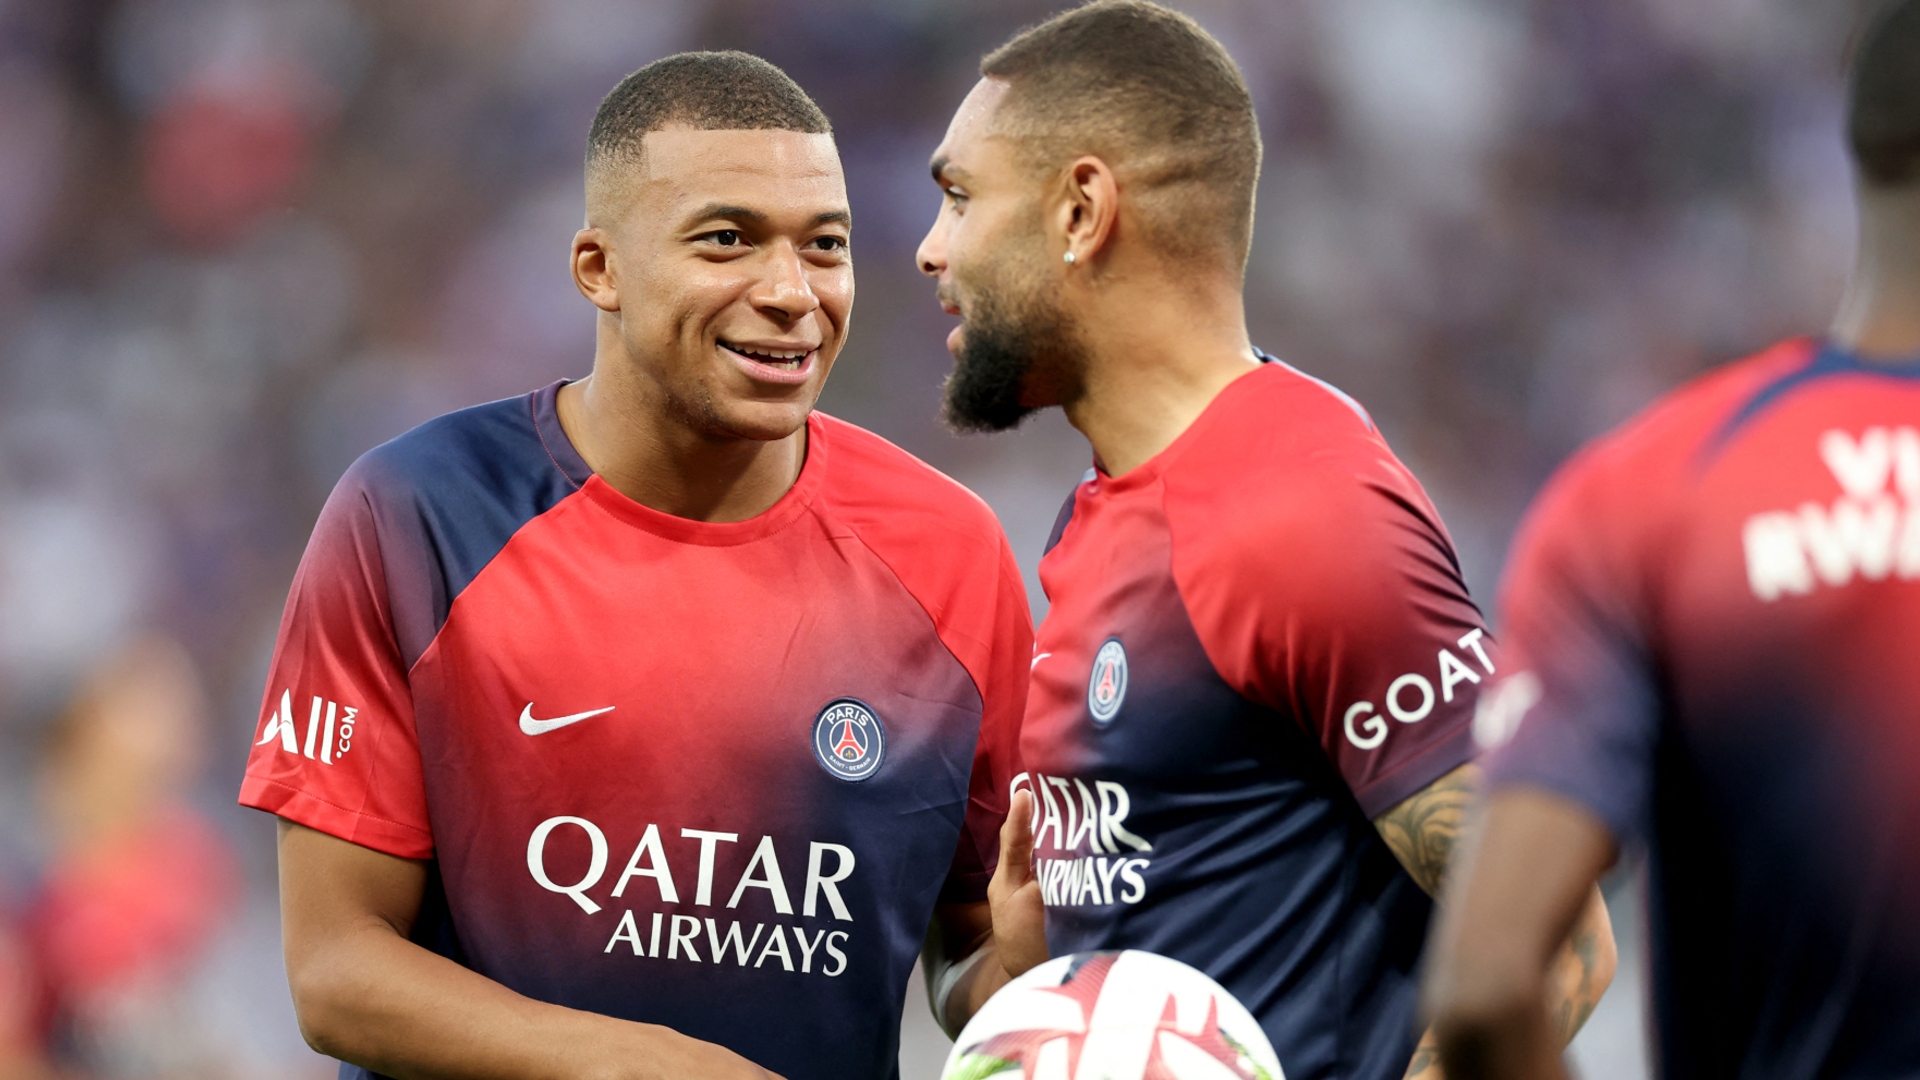 Kurzawa joining Mbappe in PSG exit